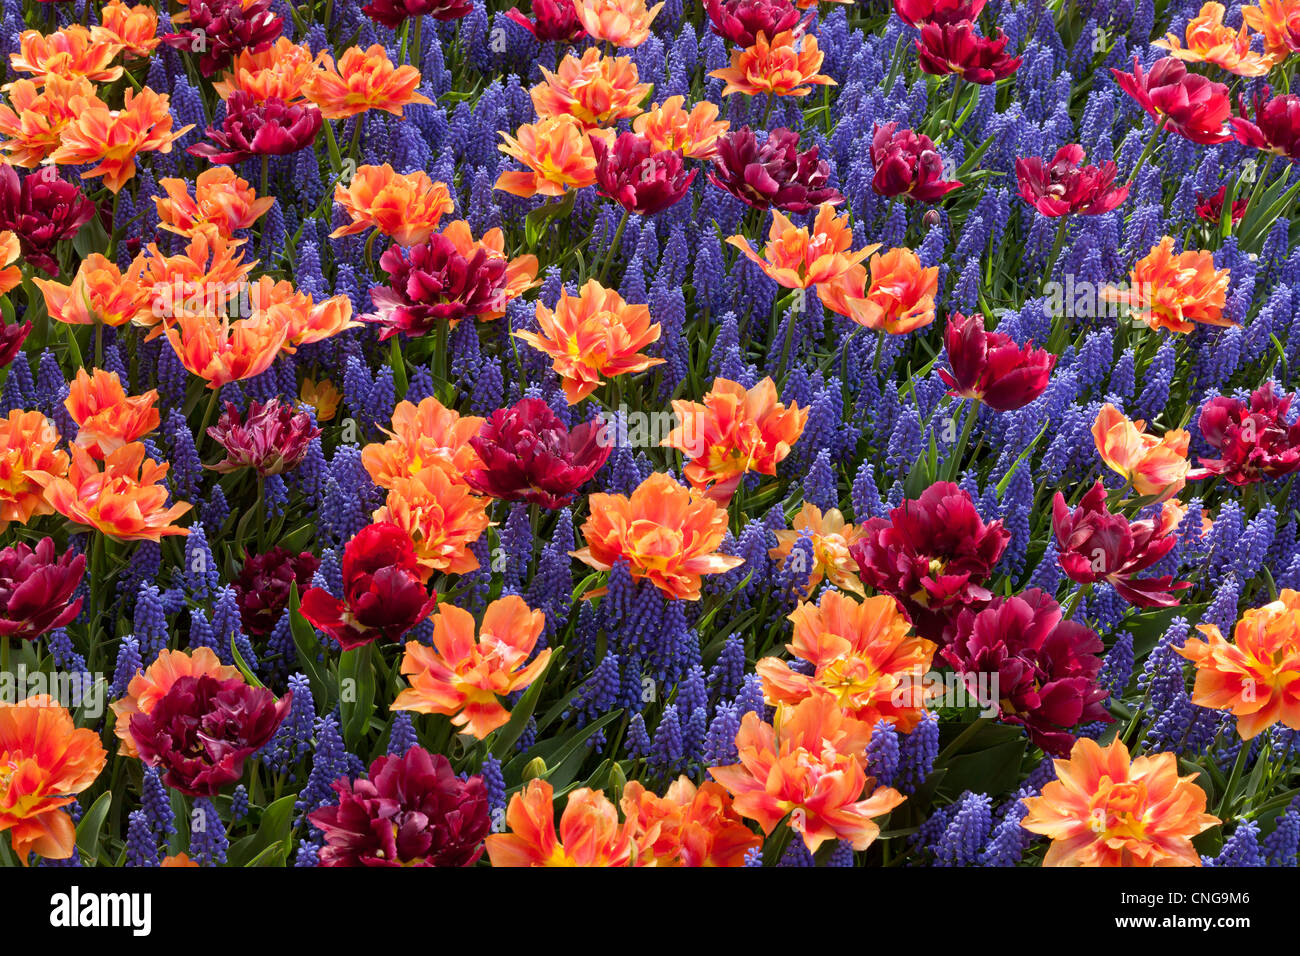 Flowerbed with Muscari armeniacum and tulips with double flowers 'David Teniers' and 'Willem Van Oranje'. Stock Photo